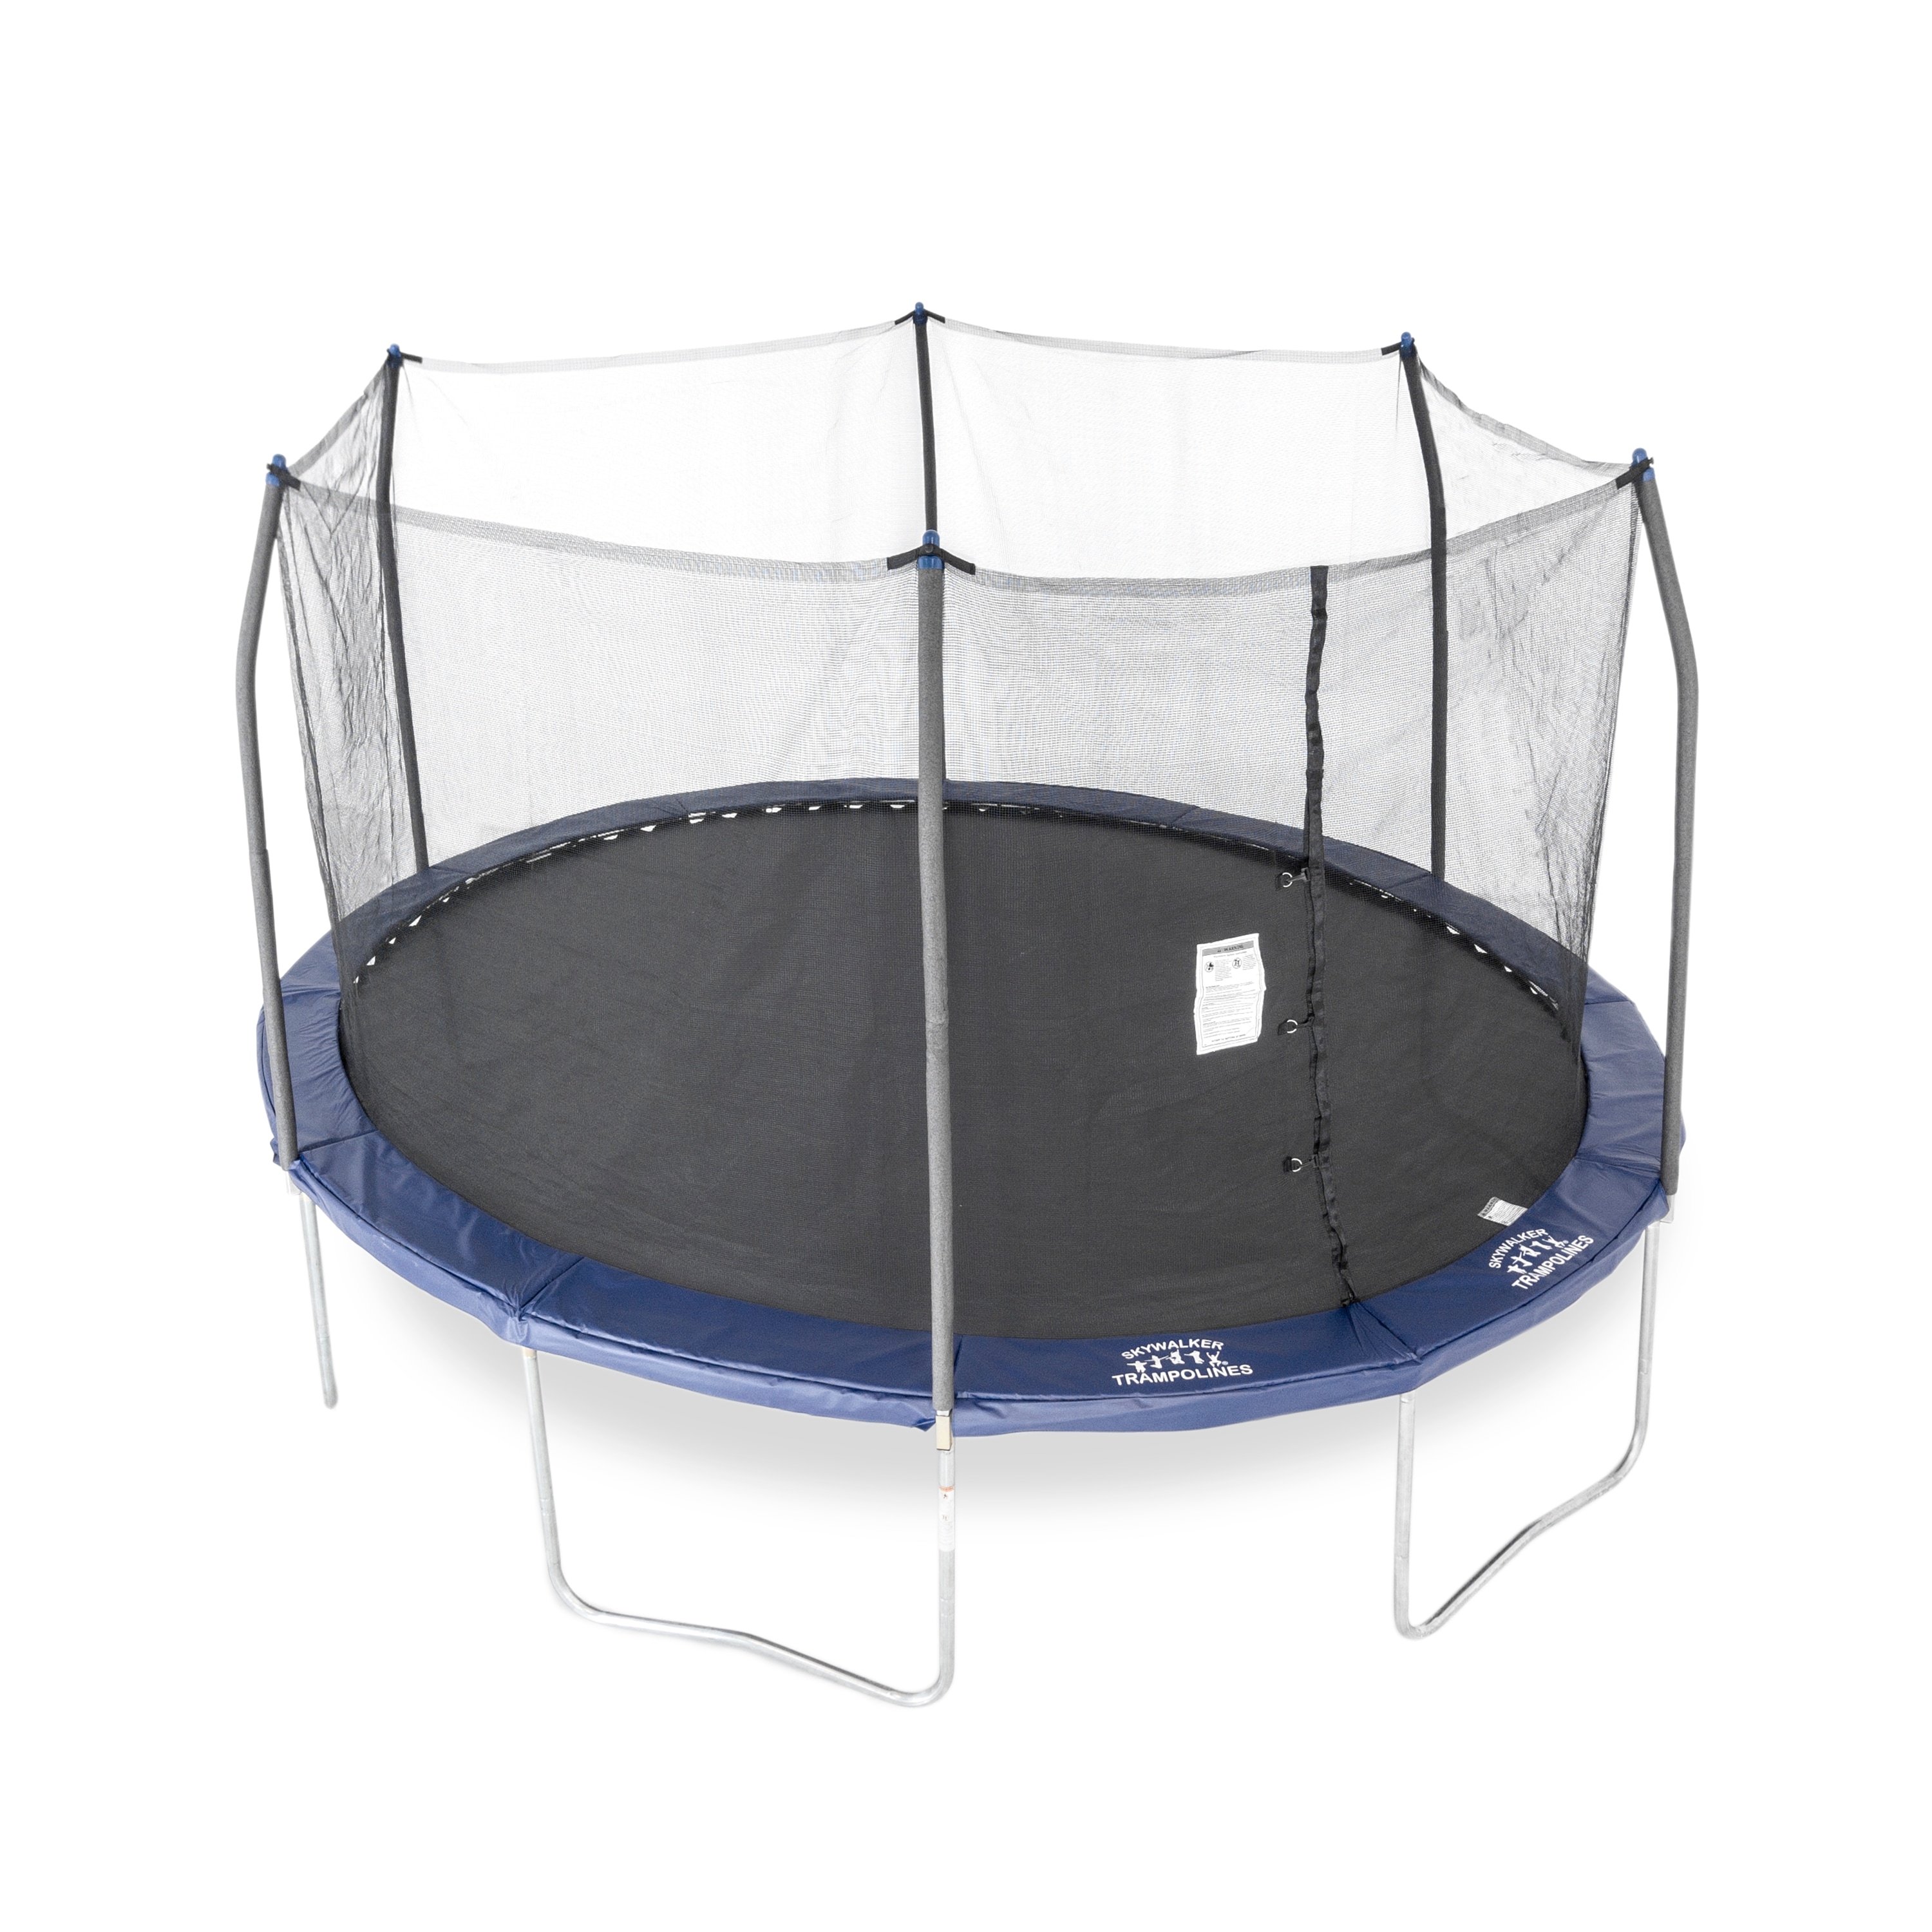 Trampolines 15x13-ft Oval Trampoline Combo with Navy Spring Pad - Outdoor Backyard Trampoline with Enclosure - Blue | - Skywalker SWTCV15N